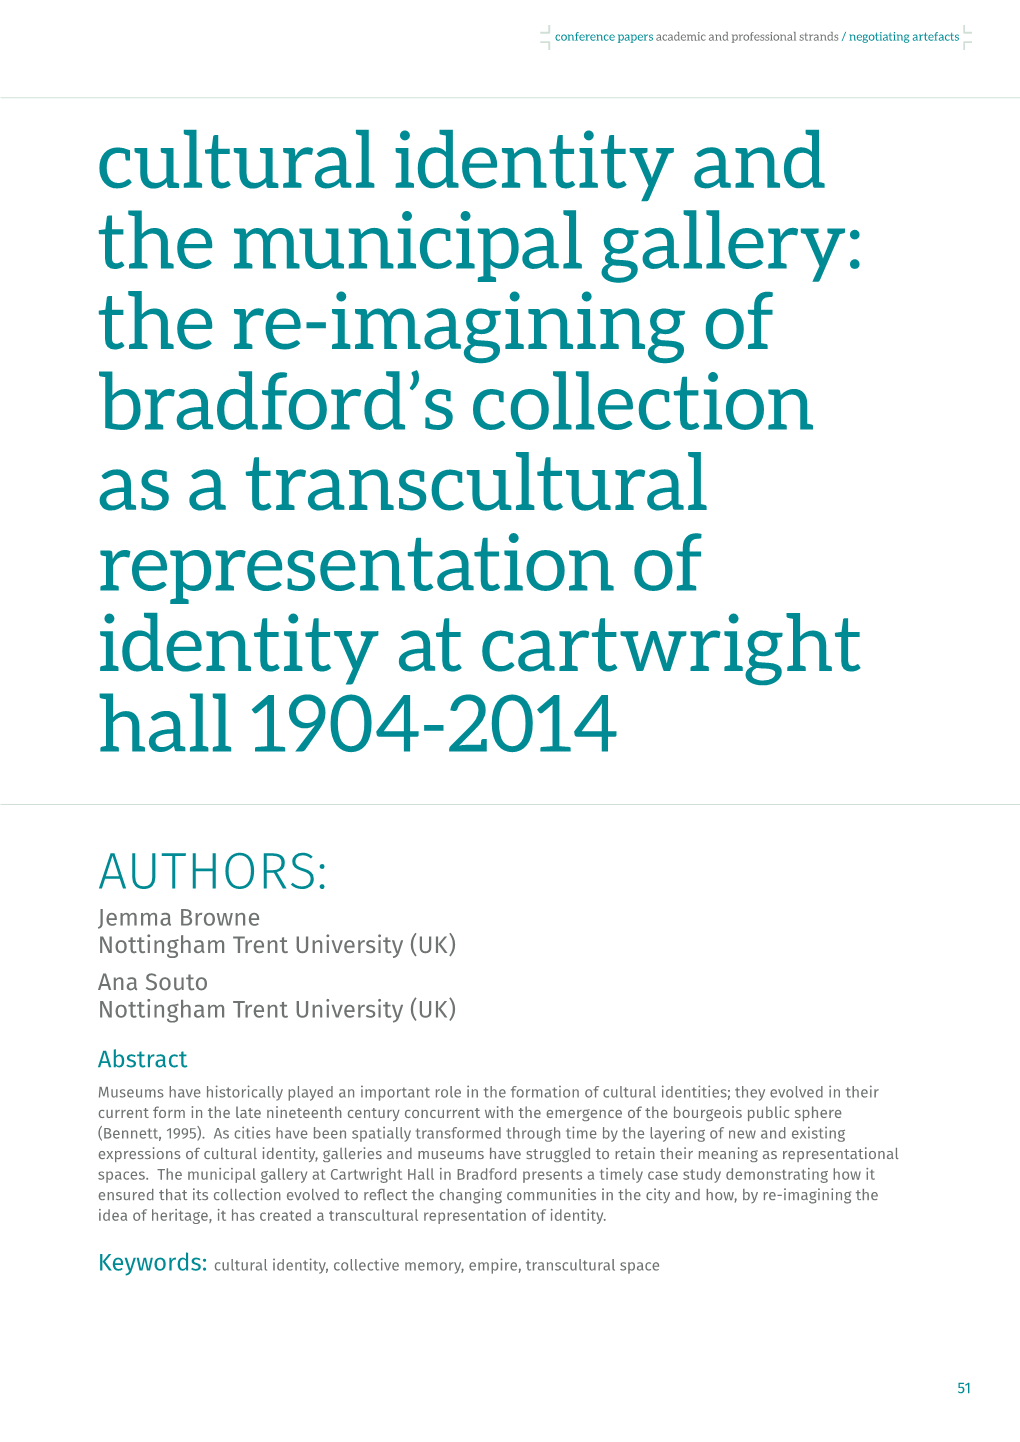 The Re-Imagining of Bradford's Collection As a Transcultural